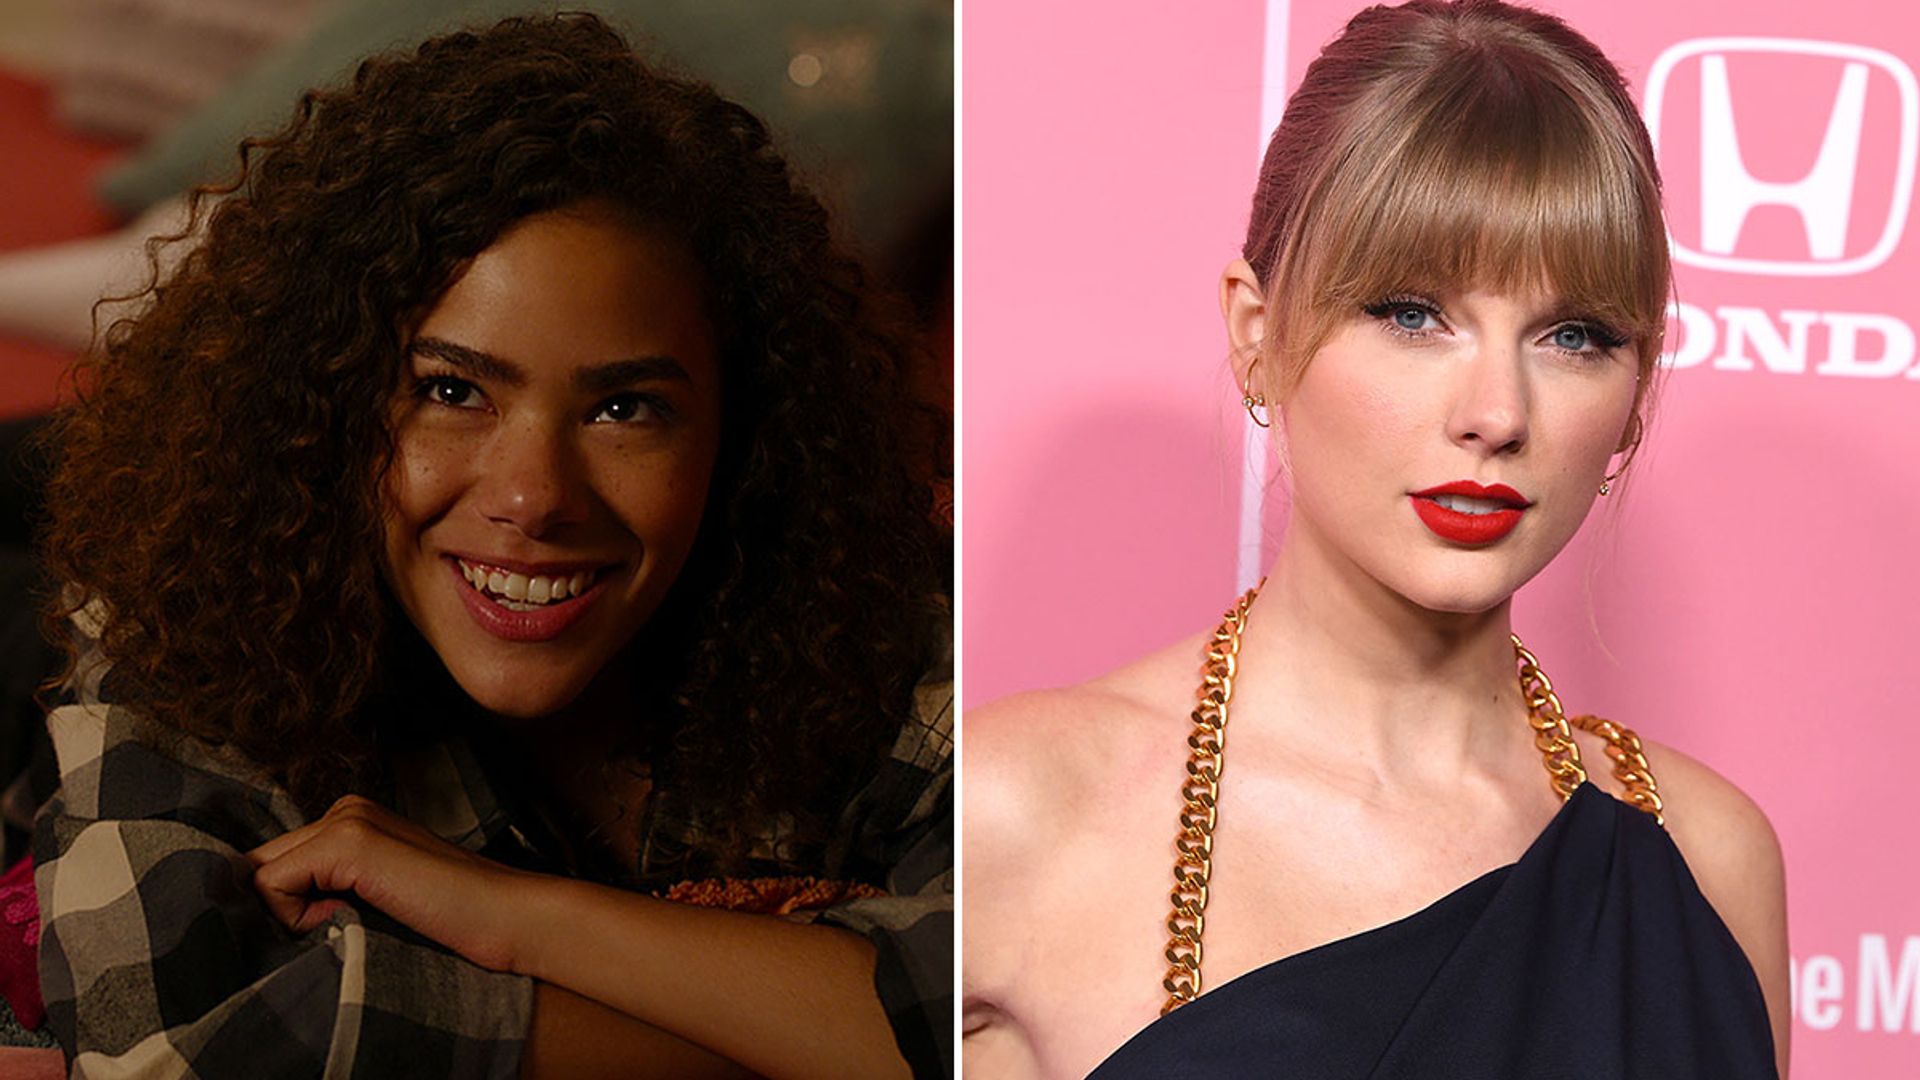 Ginny and star speaks out following backlash from Taylor Swift